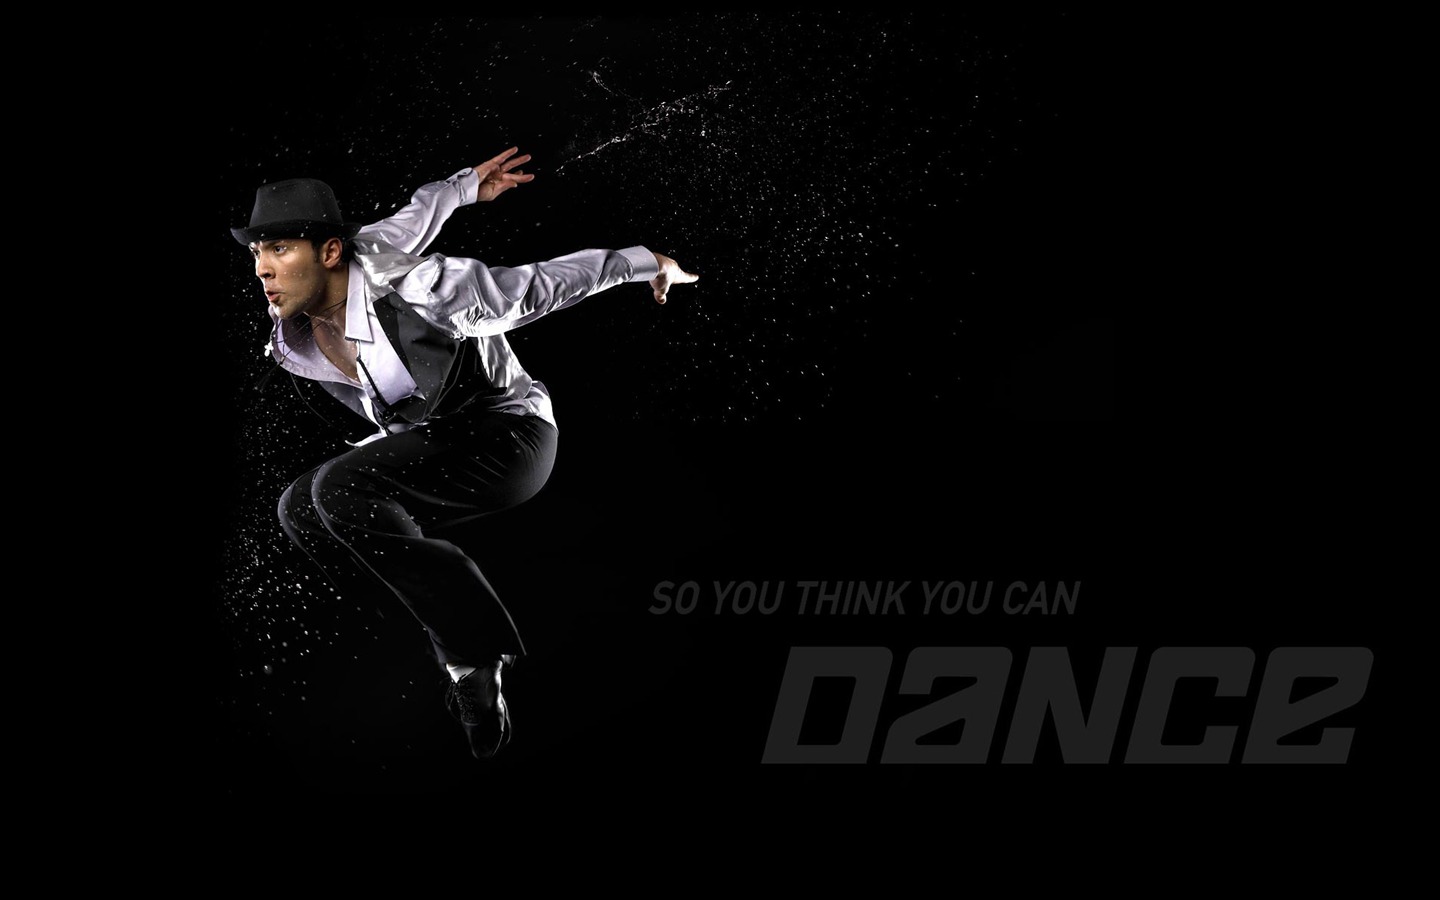 So You Think You Can Dance 舞林争霸 壁纸(一)12 - 1440x900